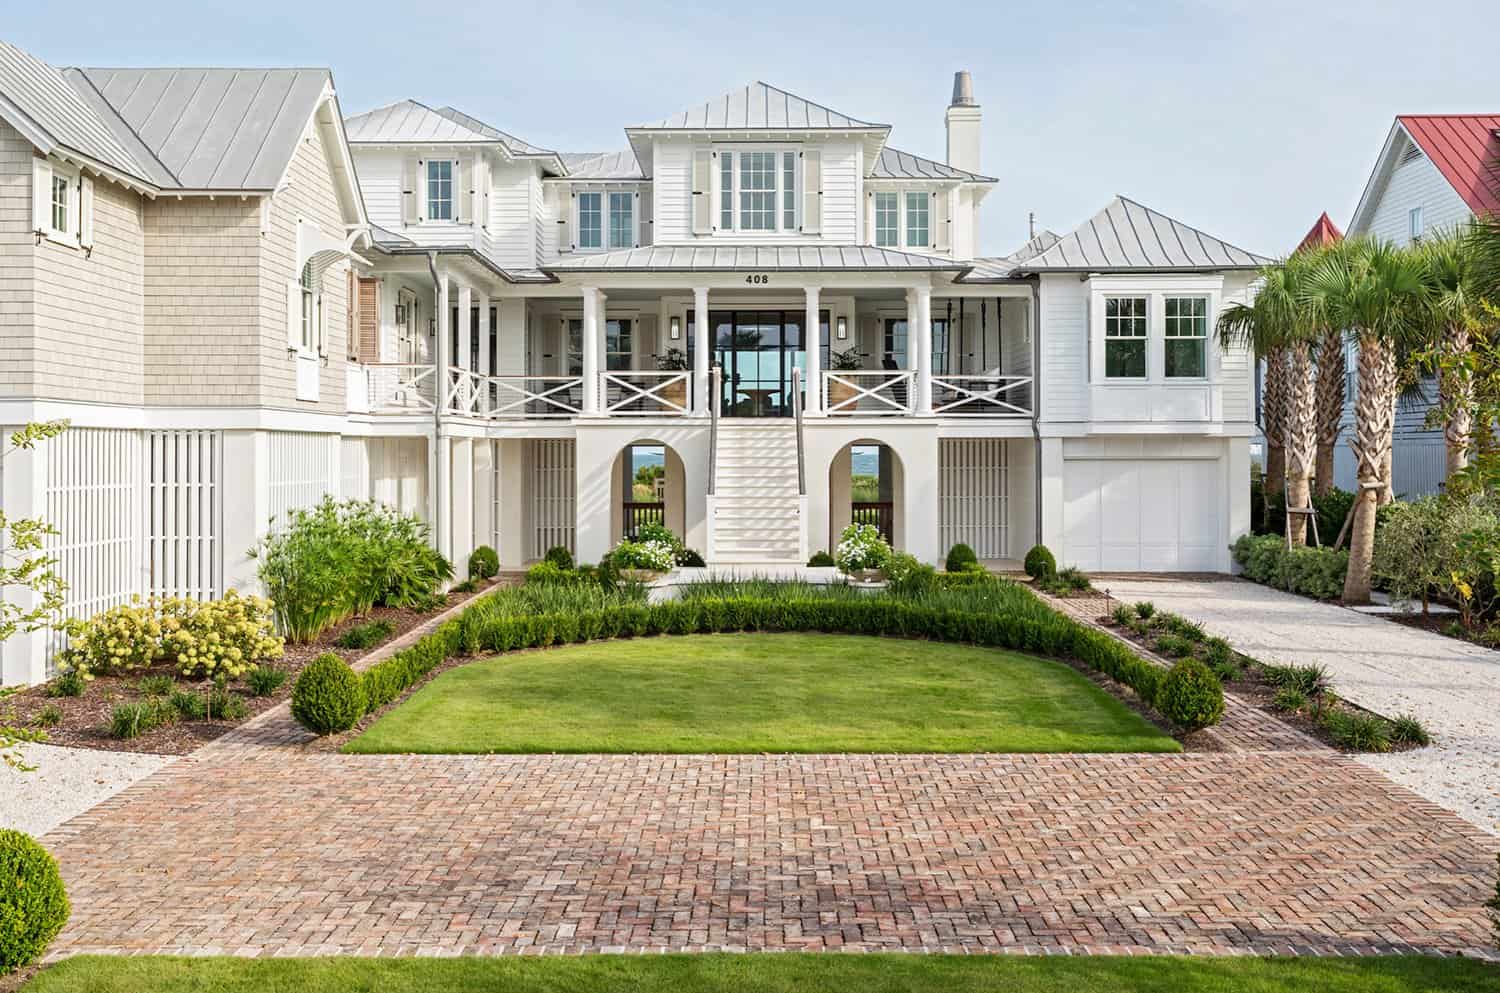 Tour this breezy and inviting Lowcountry beach house on the Isle of Palms